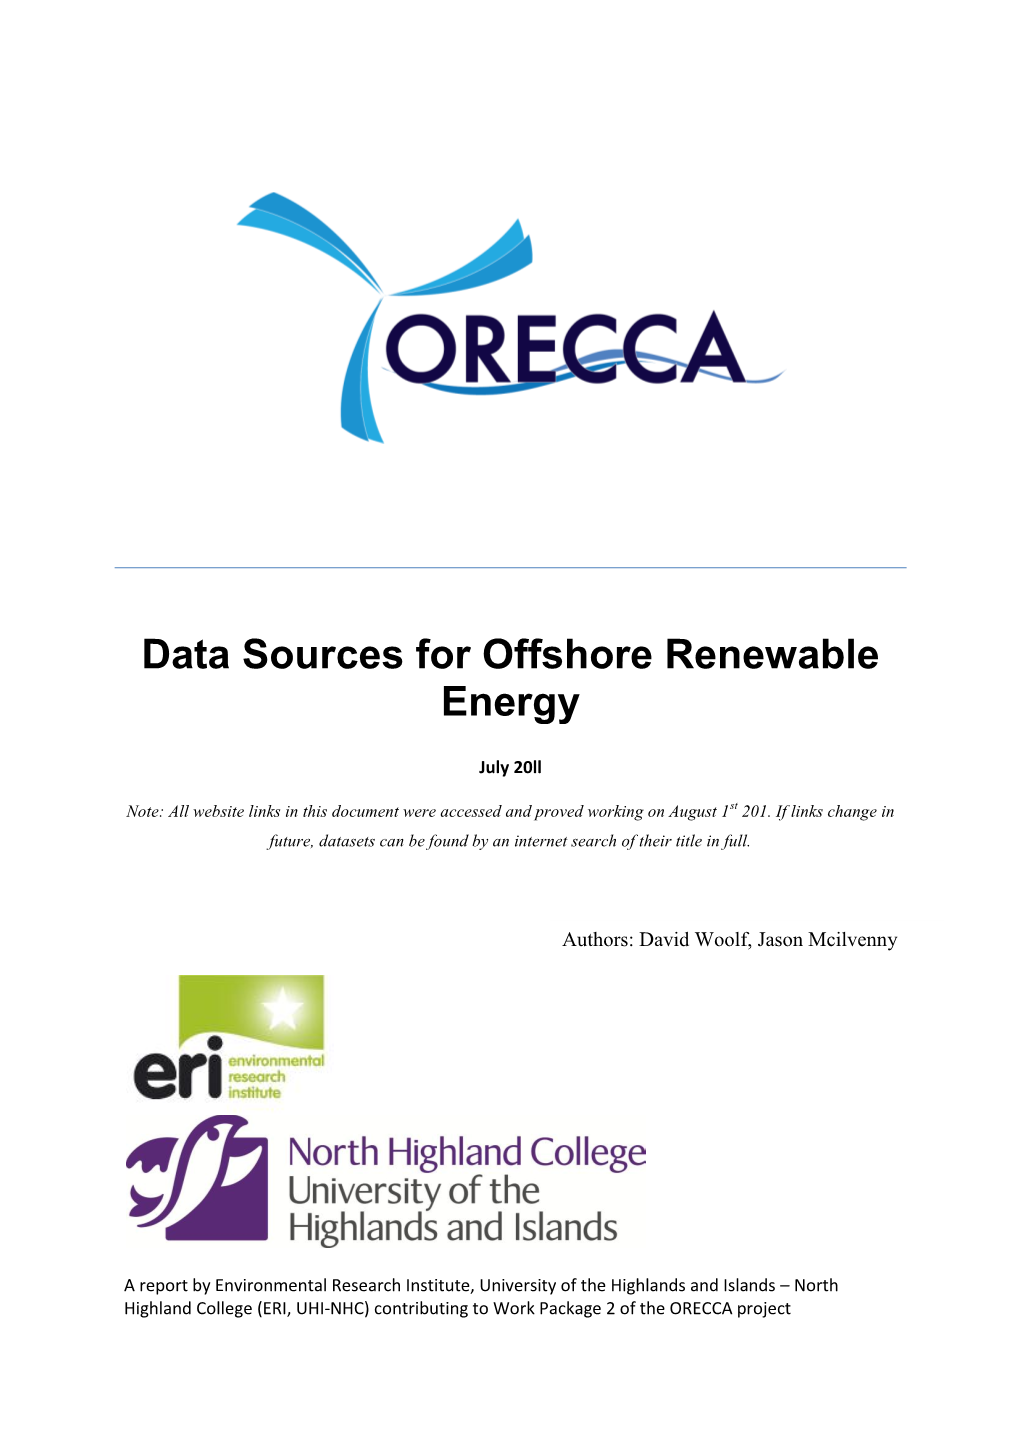 Data Sources for Offshore Renewable Energy